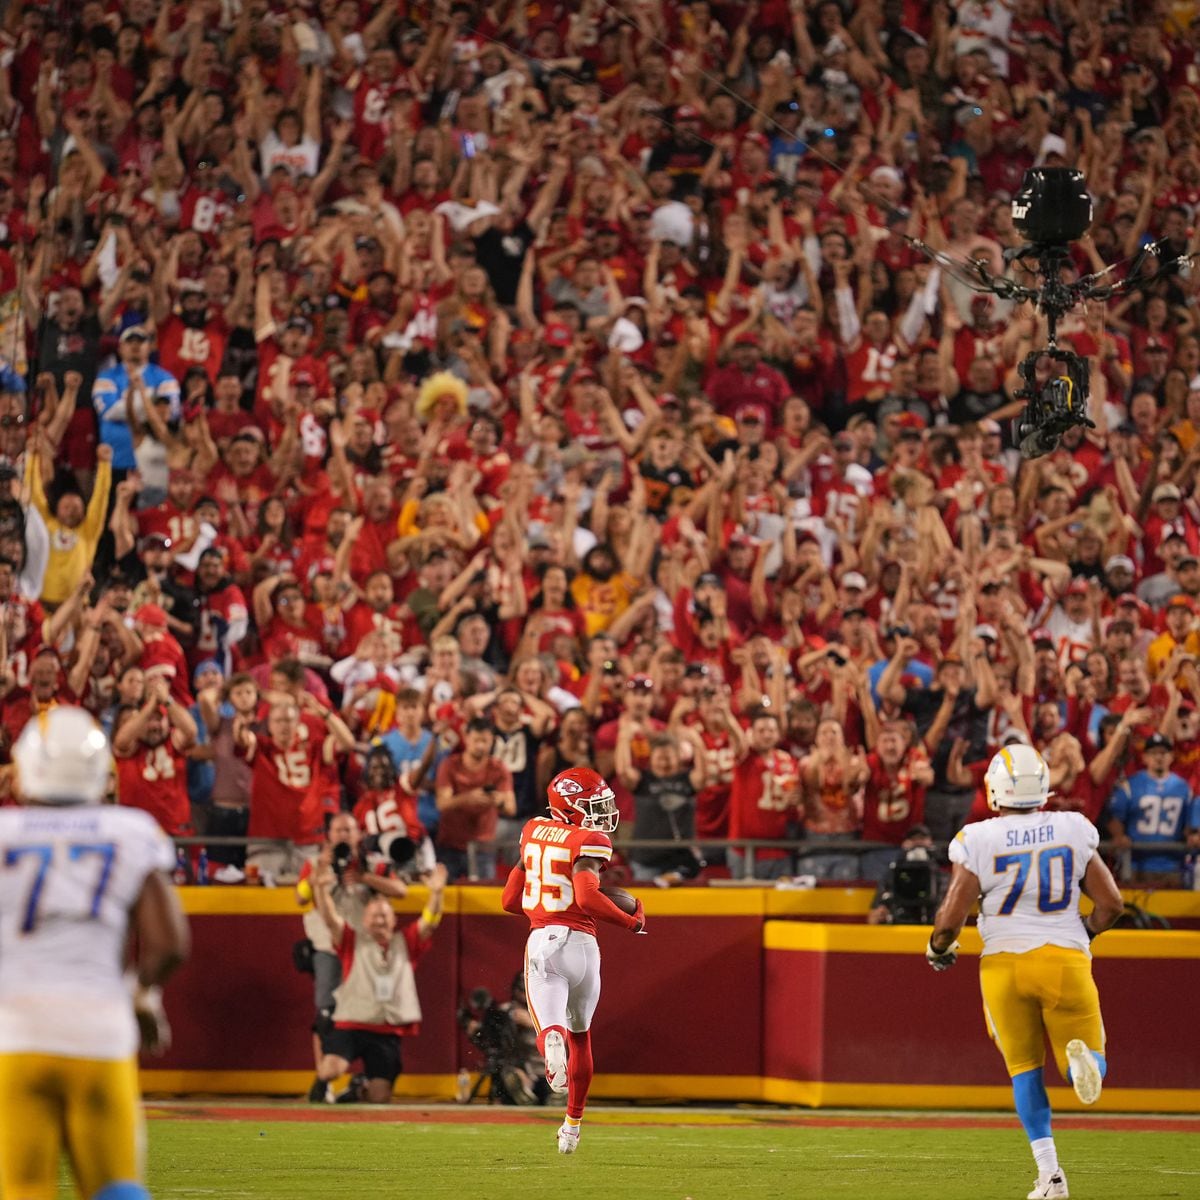 Los Angeles Chargers at Kansas City Chiefs on September 26, 2021